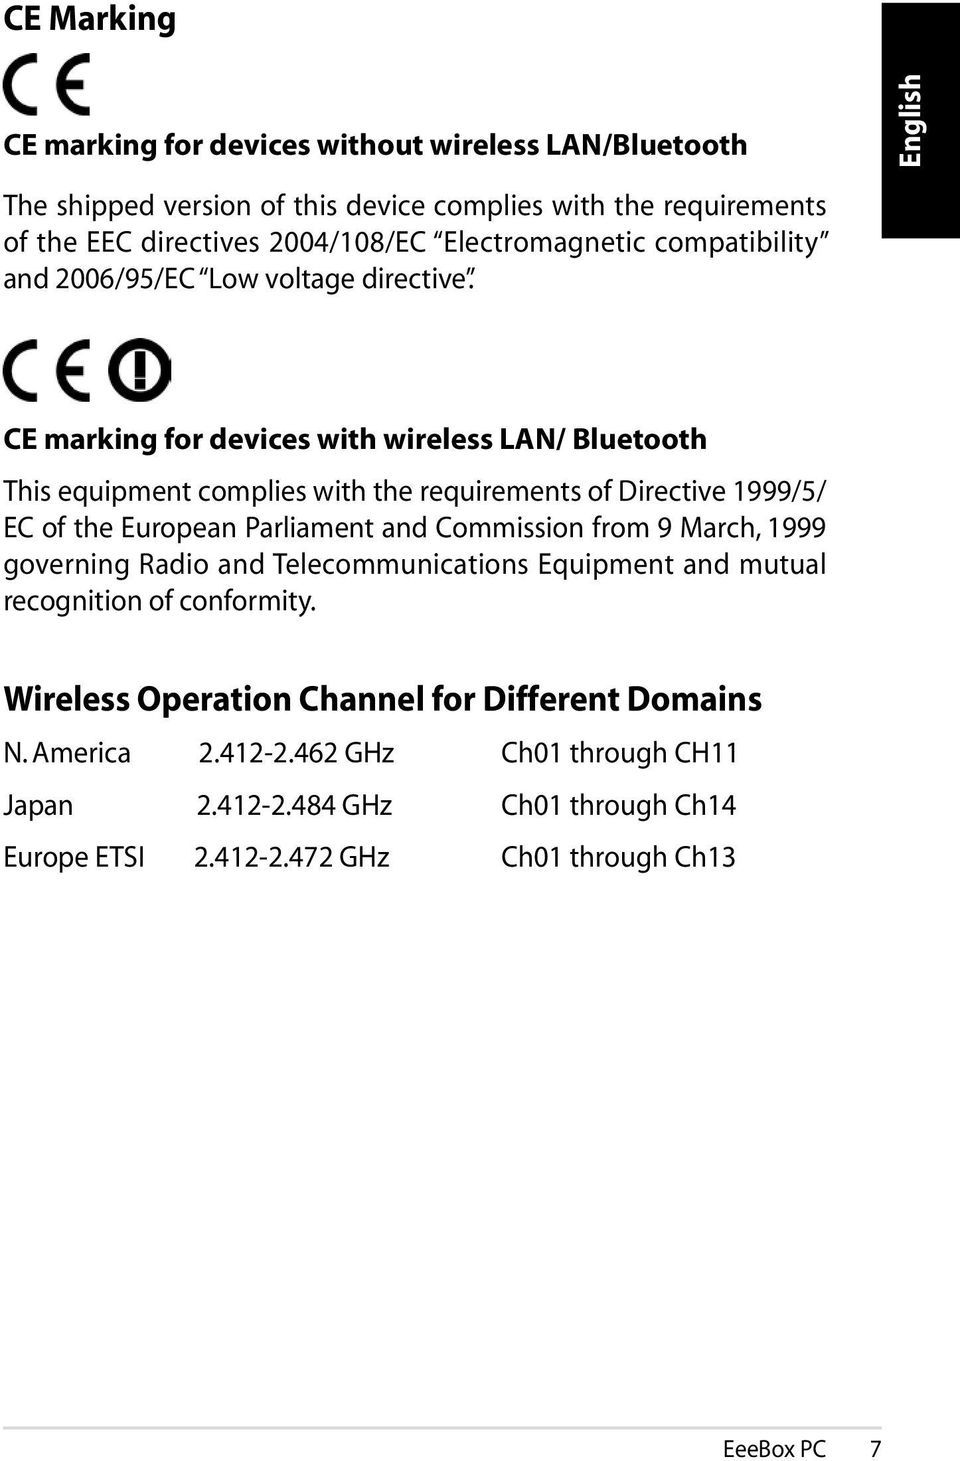 CE marking for devices with wireless LAN/ Bluetooth This equipment complies with the requirements of Directive 1999/5/ EC of the European Parliament and Commission from 9